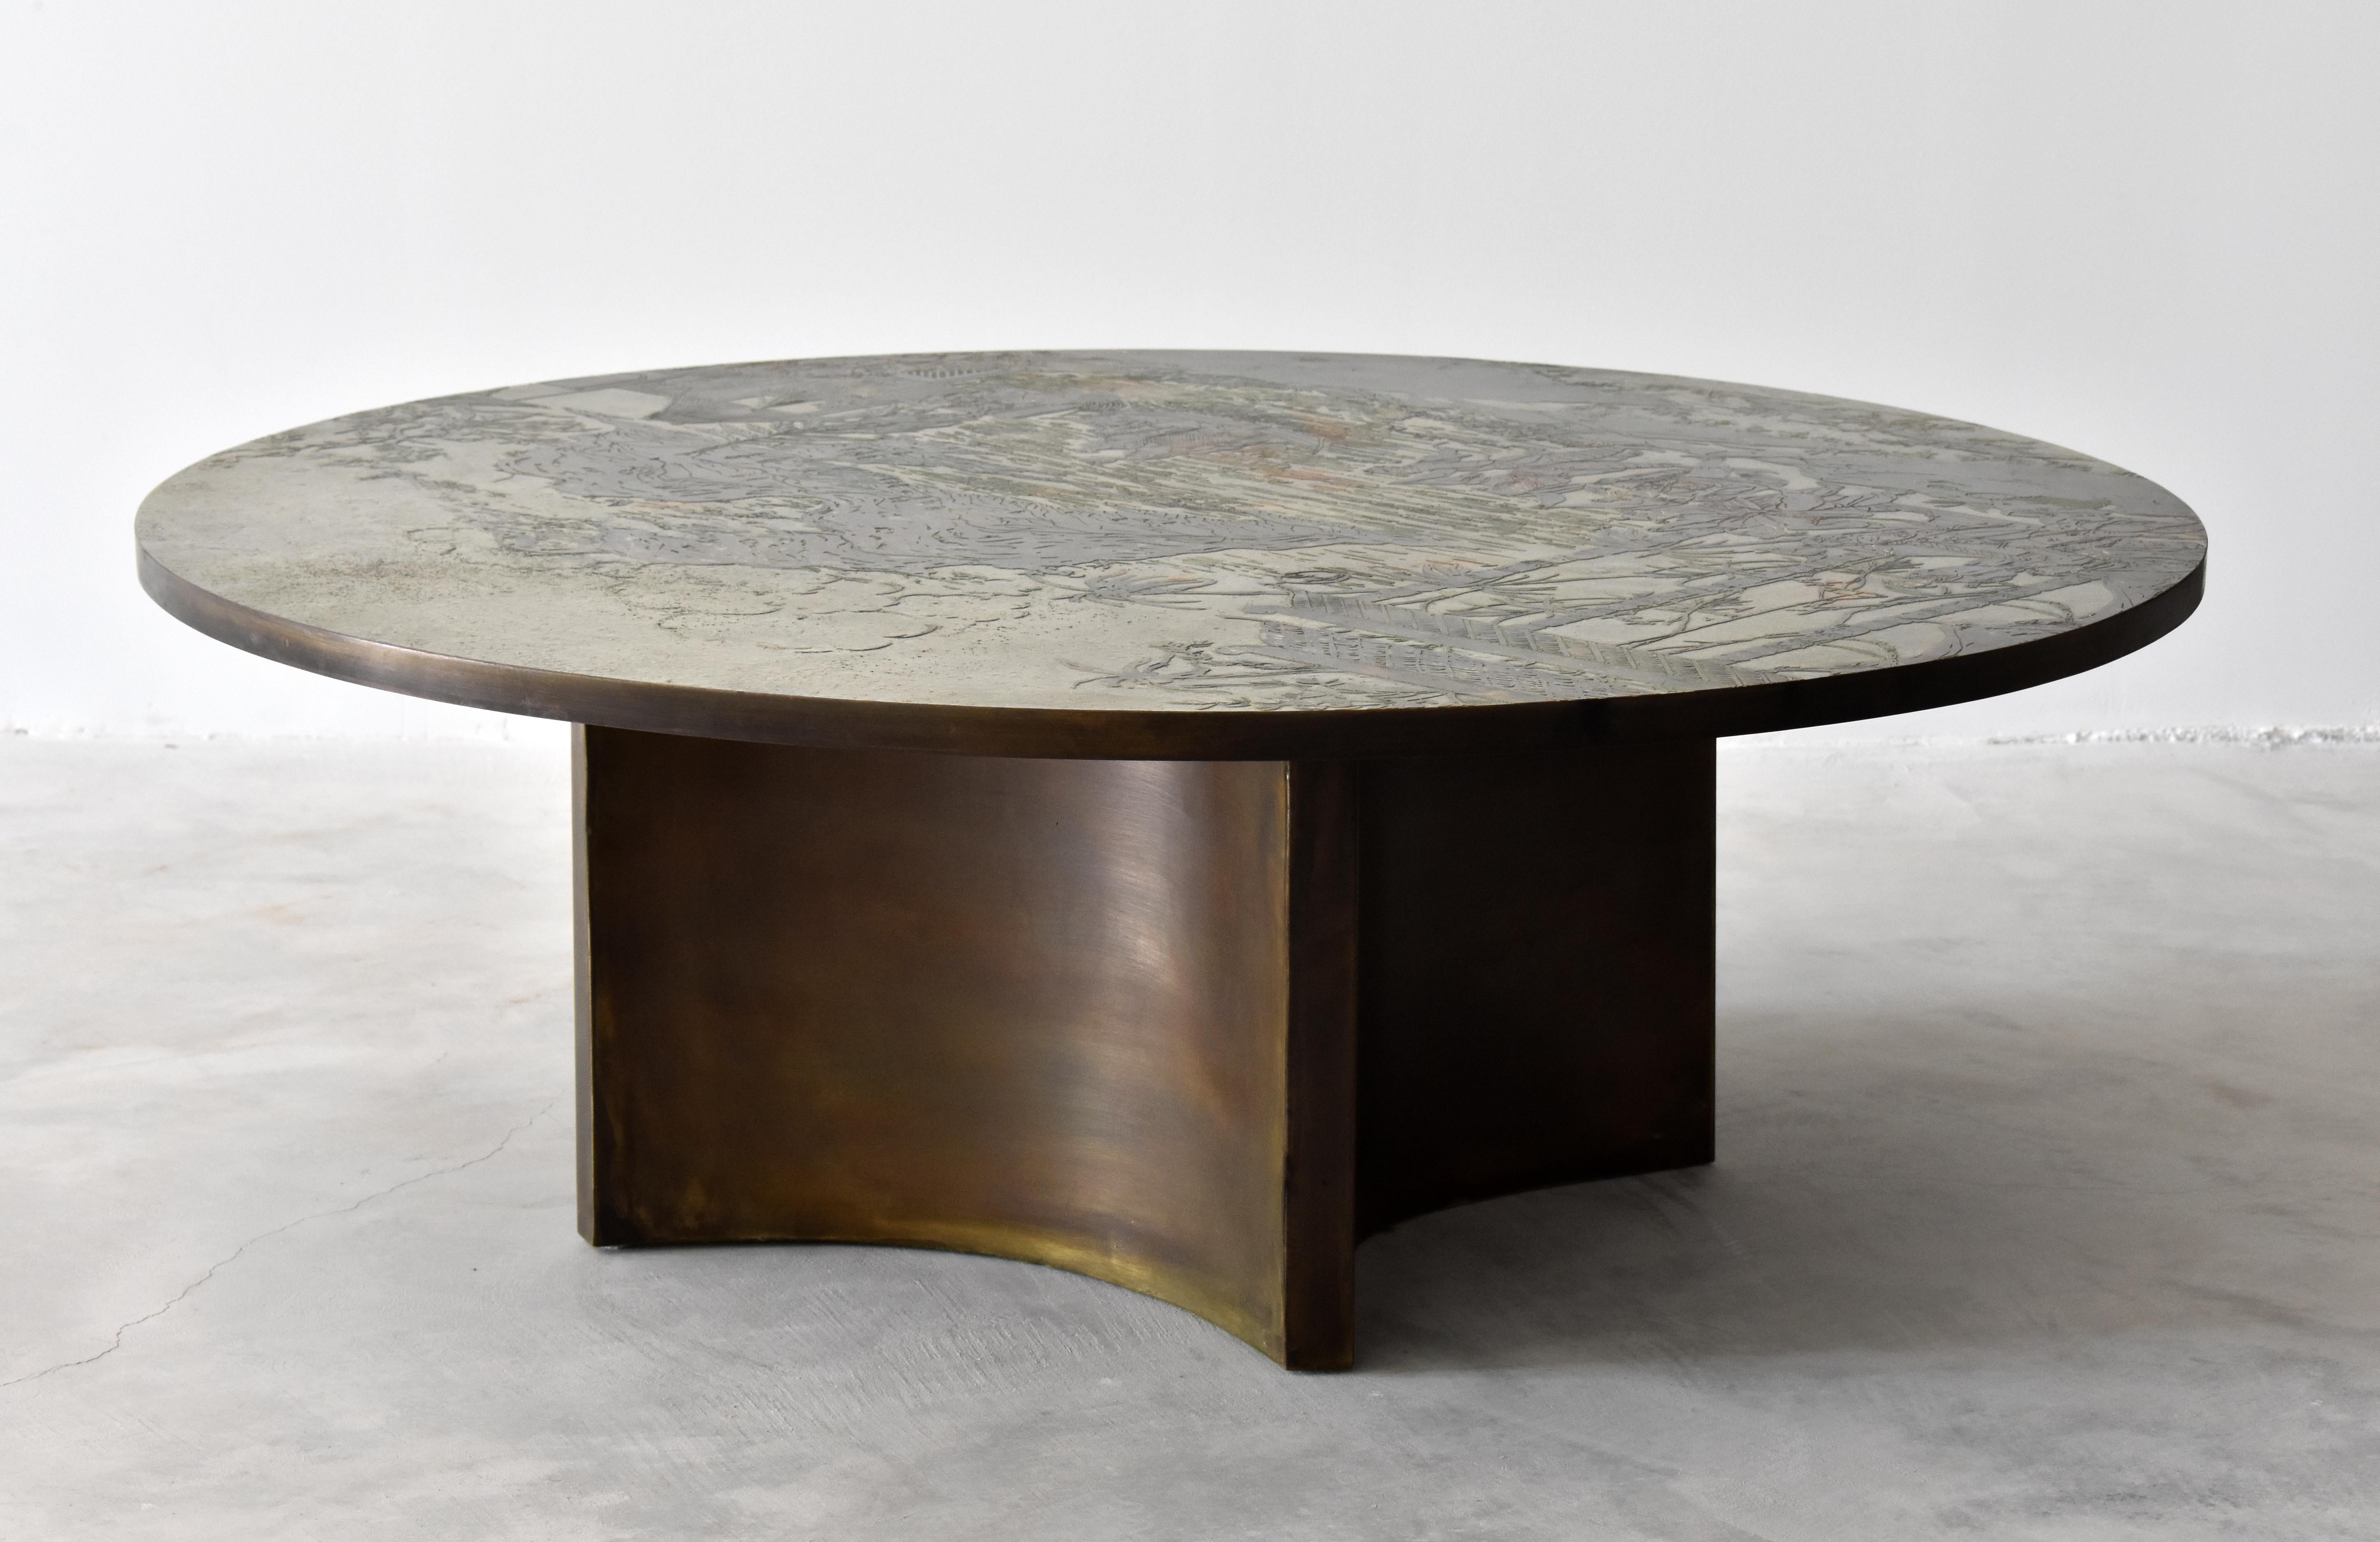 A rare and possibly custom ordered round coffee table / cocktail table by Philip & Kelvin LaVerne. The top has an Asian motif similar to that of the 